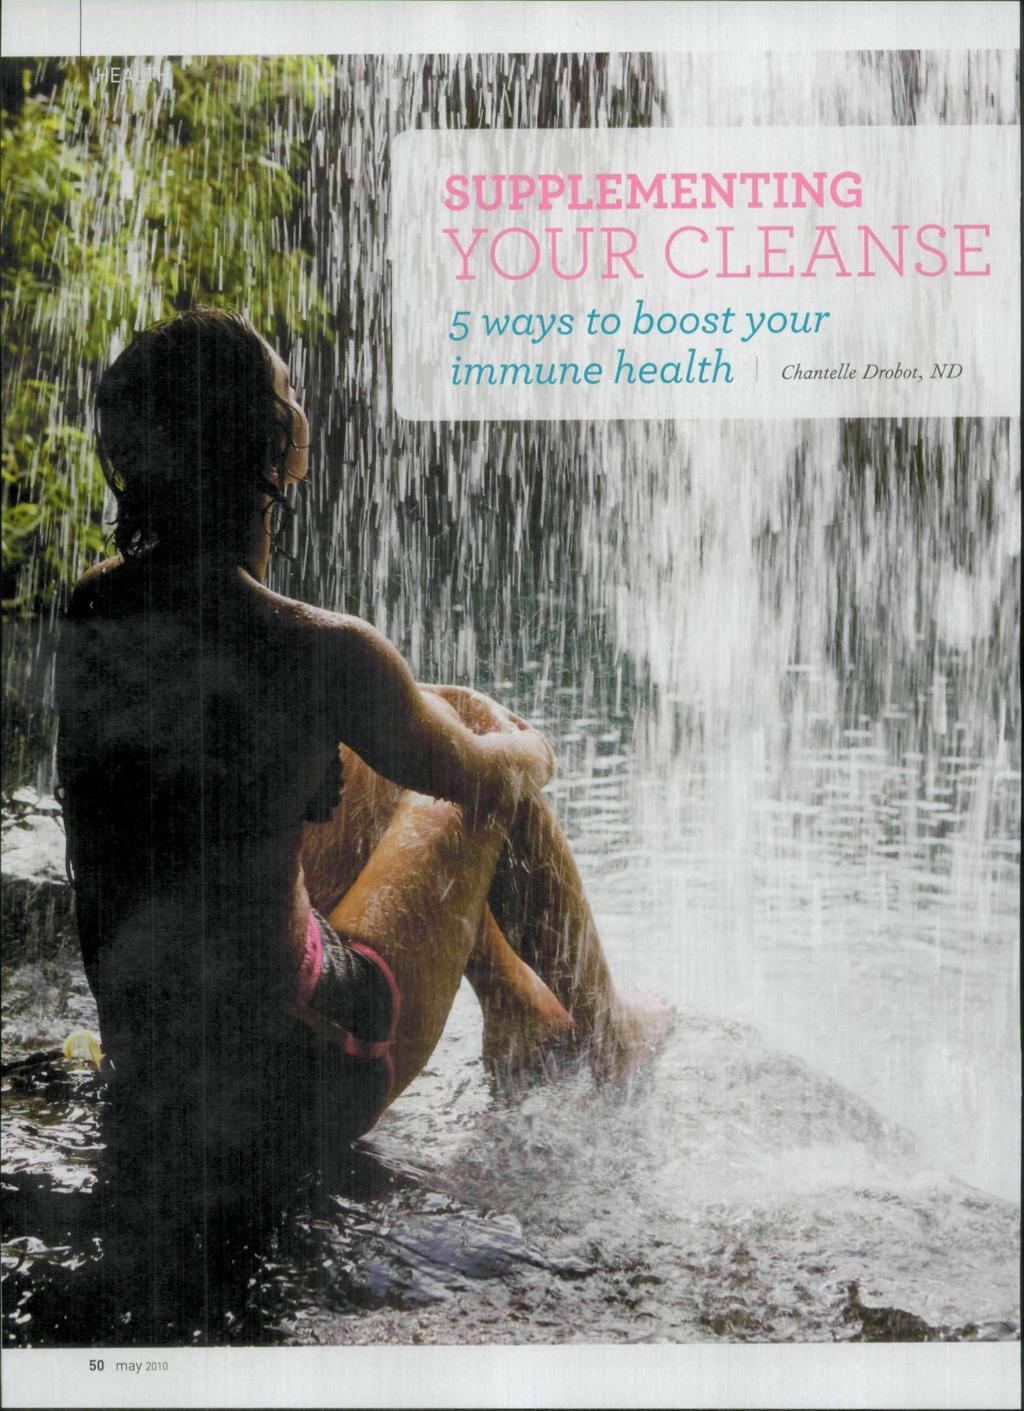 50 may 2010 SUPPLEMENTING YOUR CLEANSE 5 ways